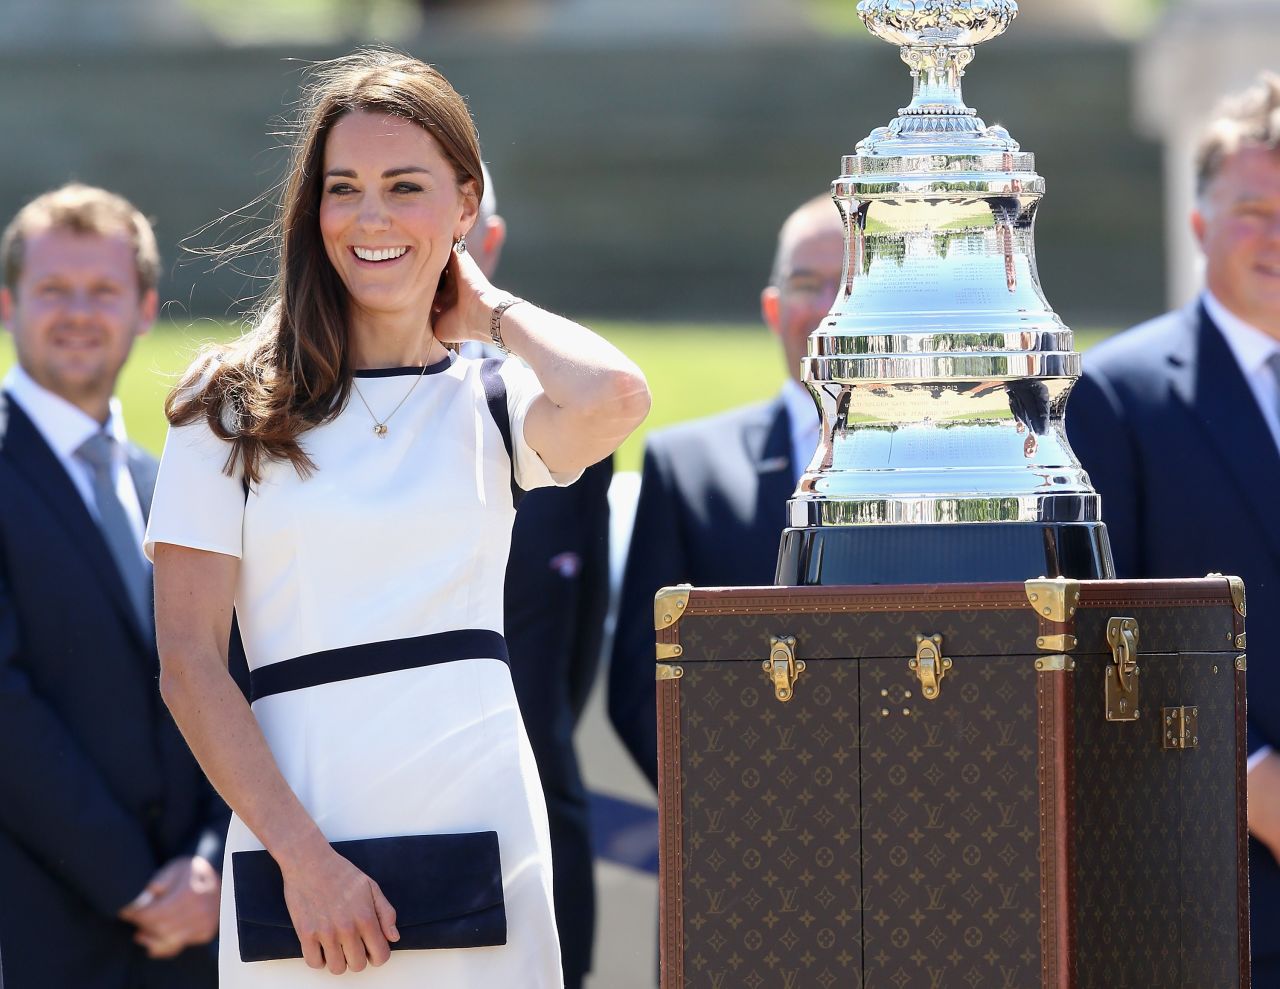 The British launched their $134 million bid earlier this year alongside the Duchess of Cambridge, Kate Middleton, who is also a keen sailor.